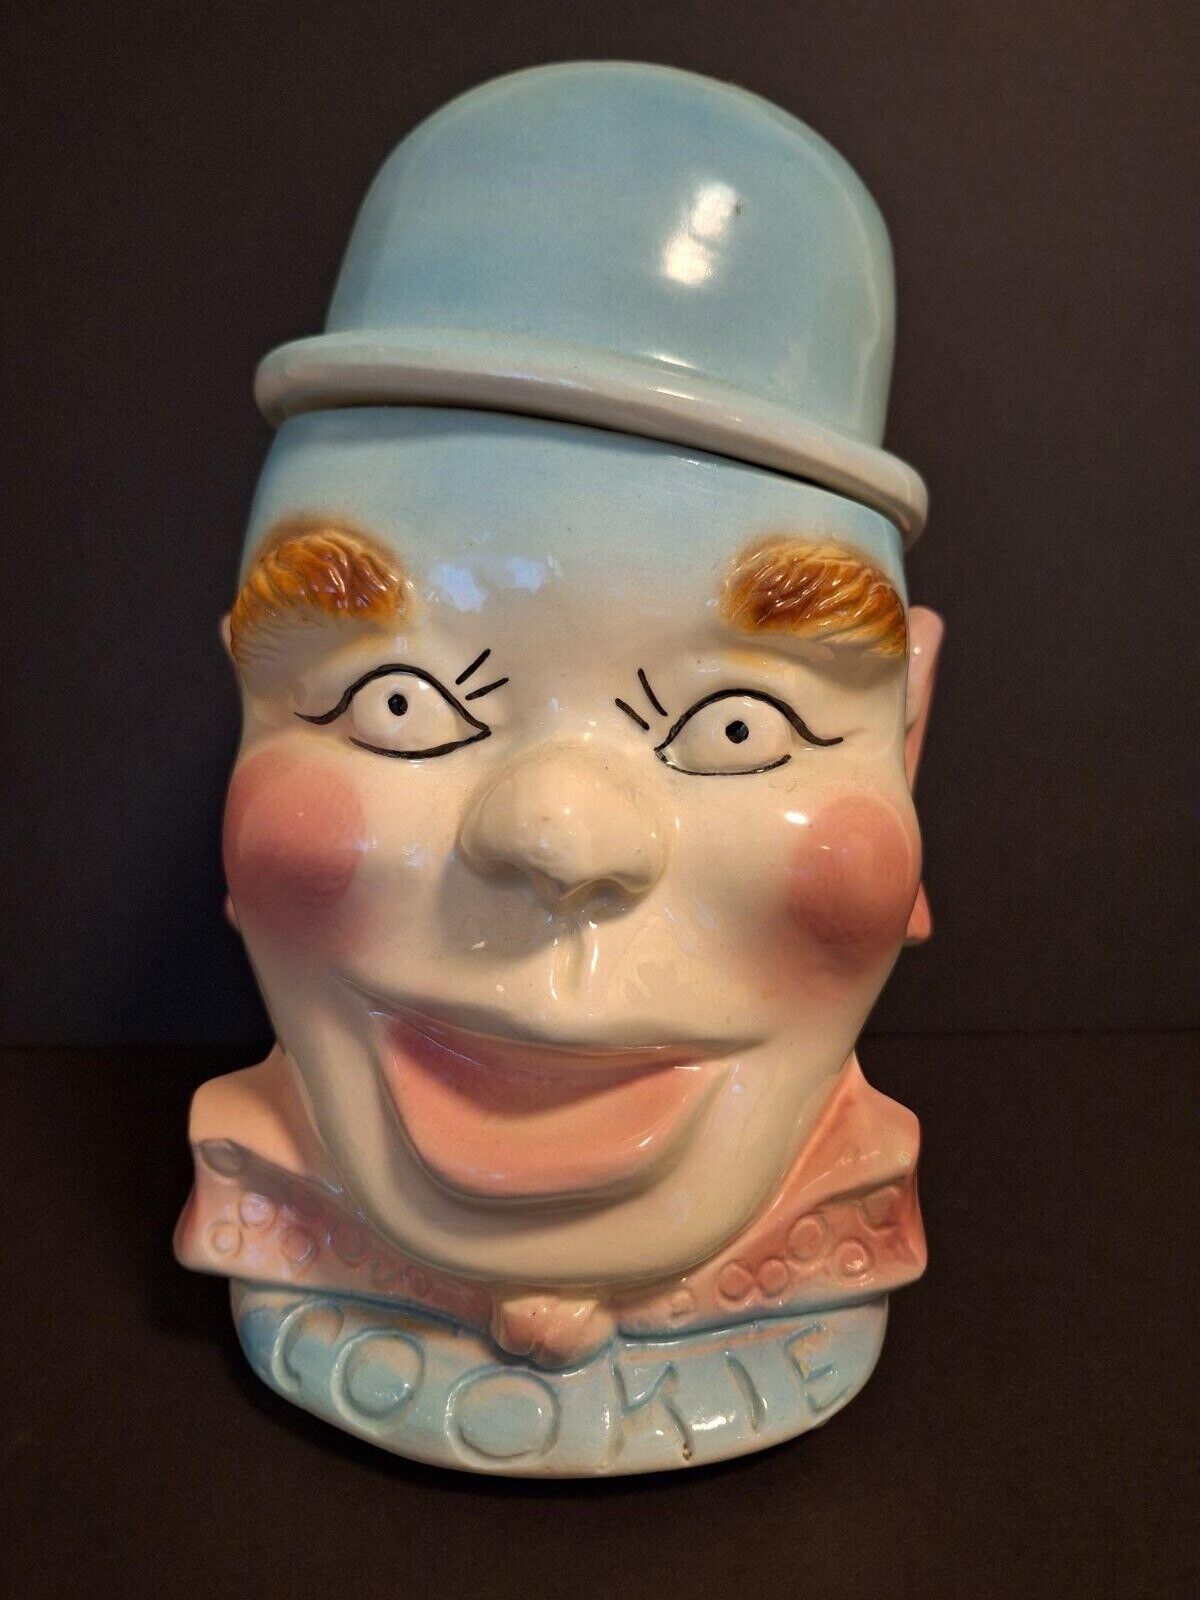 Pinky The Clown Cookie Jar: Blue Painted/EXCELLENT condition